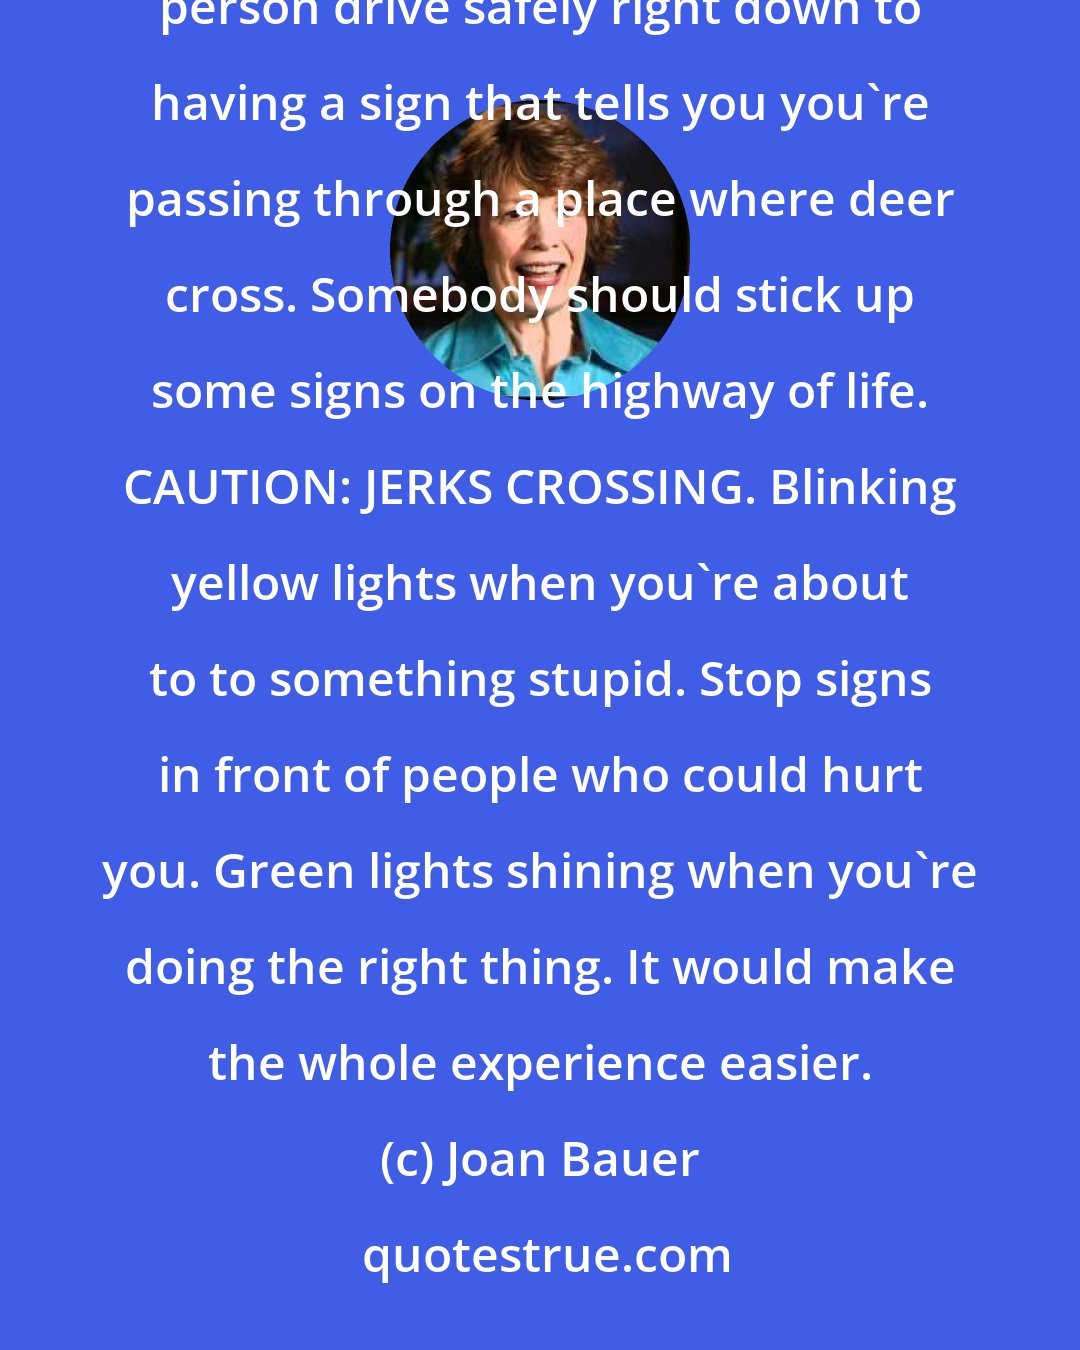 Joan Bauer: It seemed to me that the people who made the rules of the road had figured out everything that would help a person drive safely right down to having a sign that tells you you're passing through a place where deer cross. Somebody should stick up some signs on the highway of life. CAUTION: JERKS CROSSING. Blinking yellow lights when you're about to to something stupid. Stop signs in front of people who could hurt you. Green lights shining when you're doing the right thing. It would make the whole experience easier.